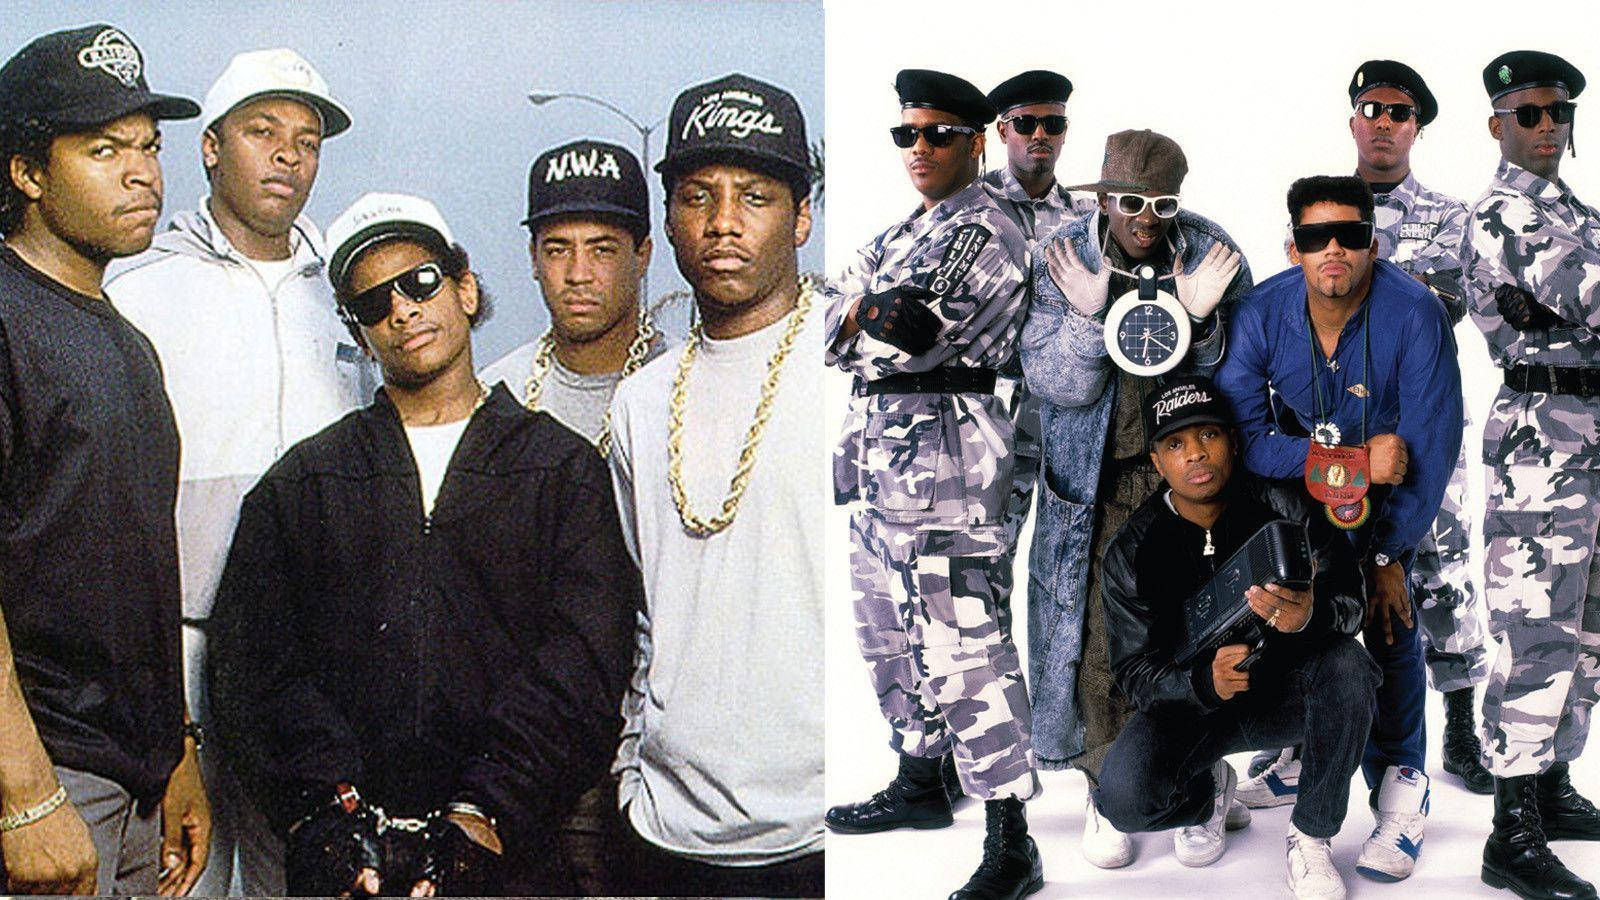 N.W.A. And Public Enemy Hip Hop Groups Wallpaper